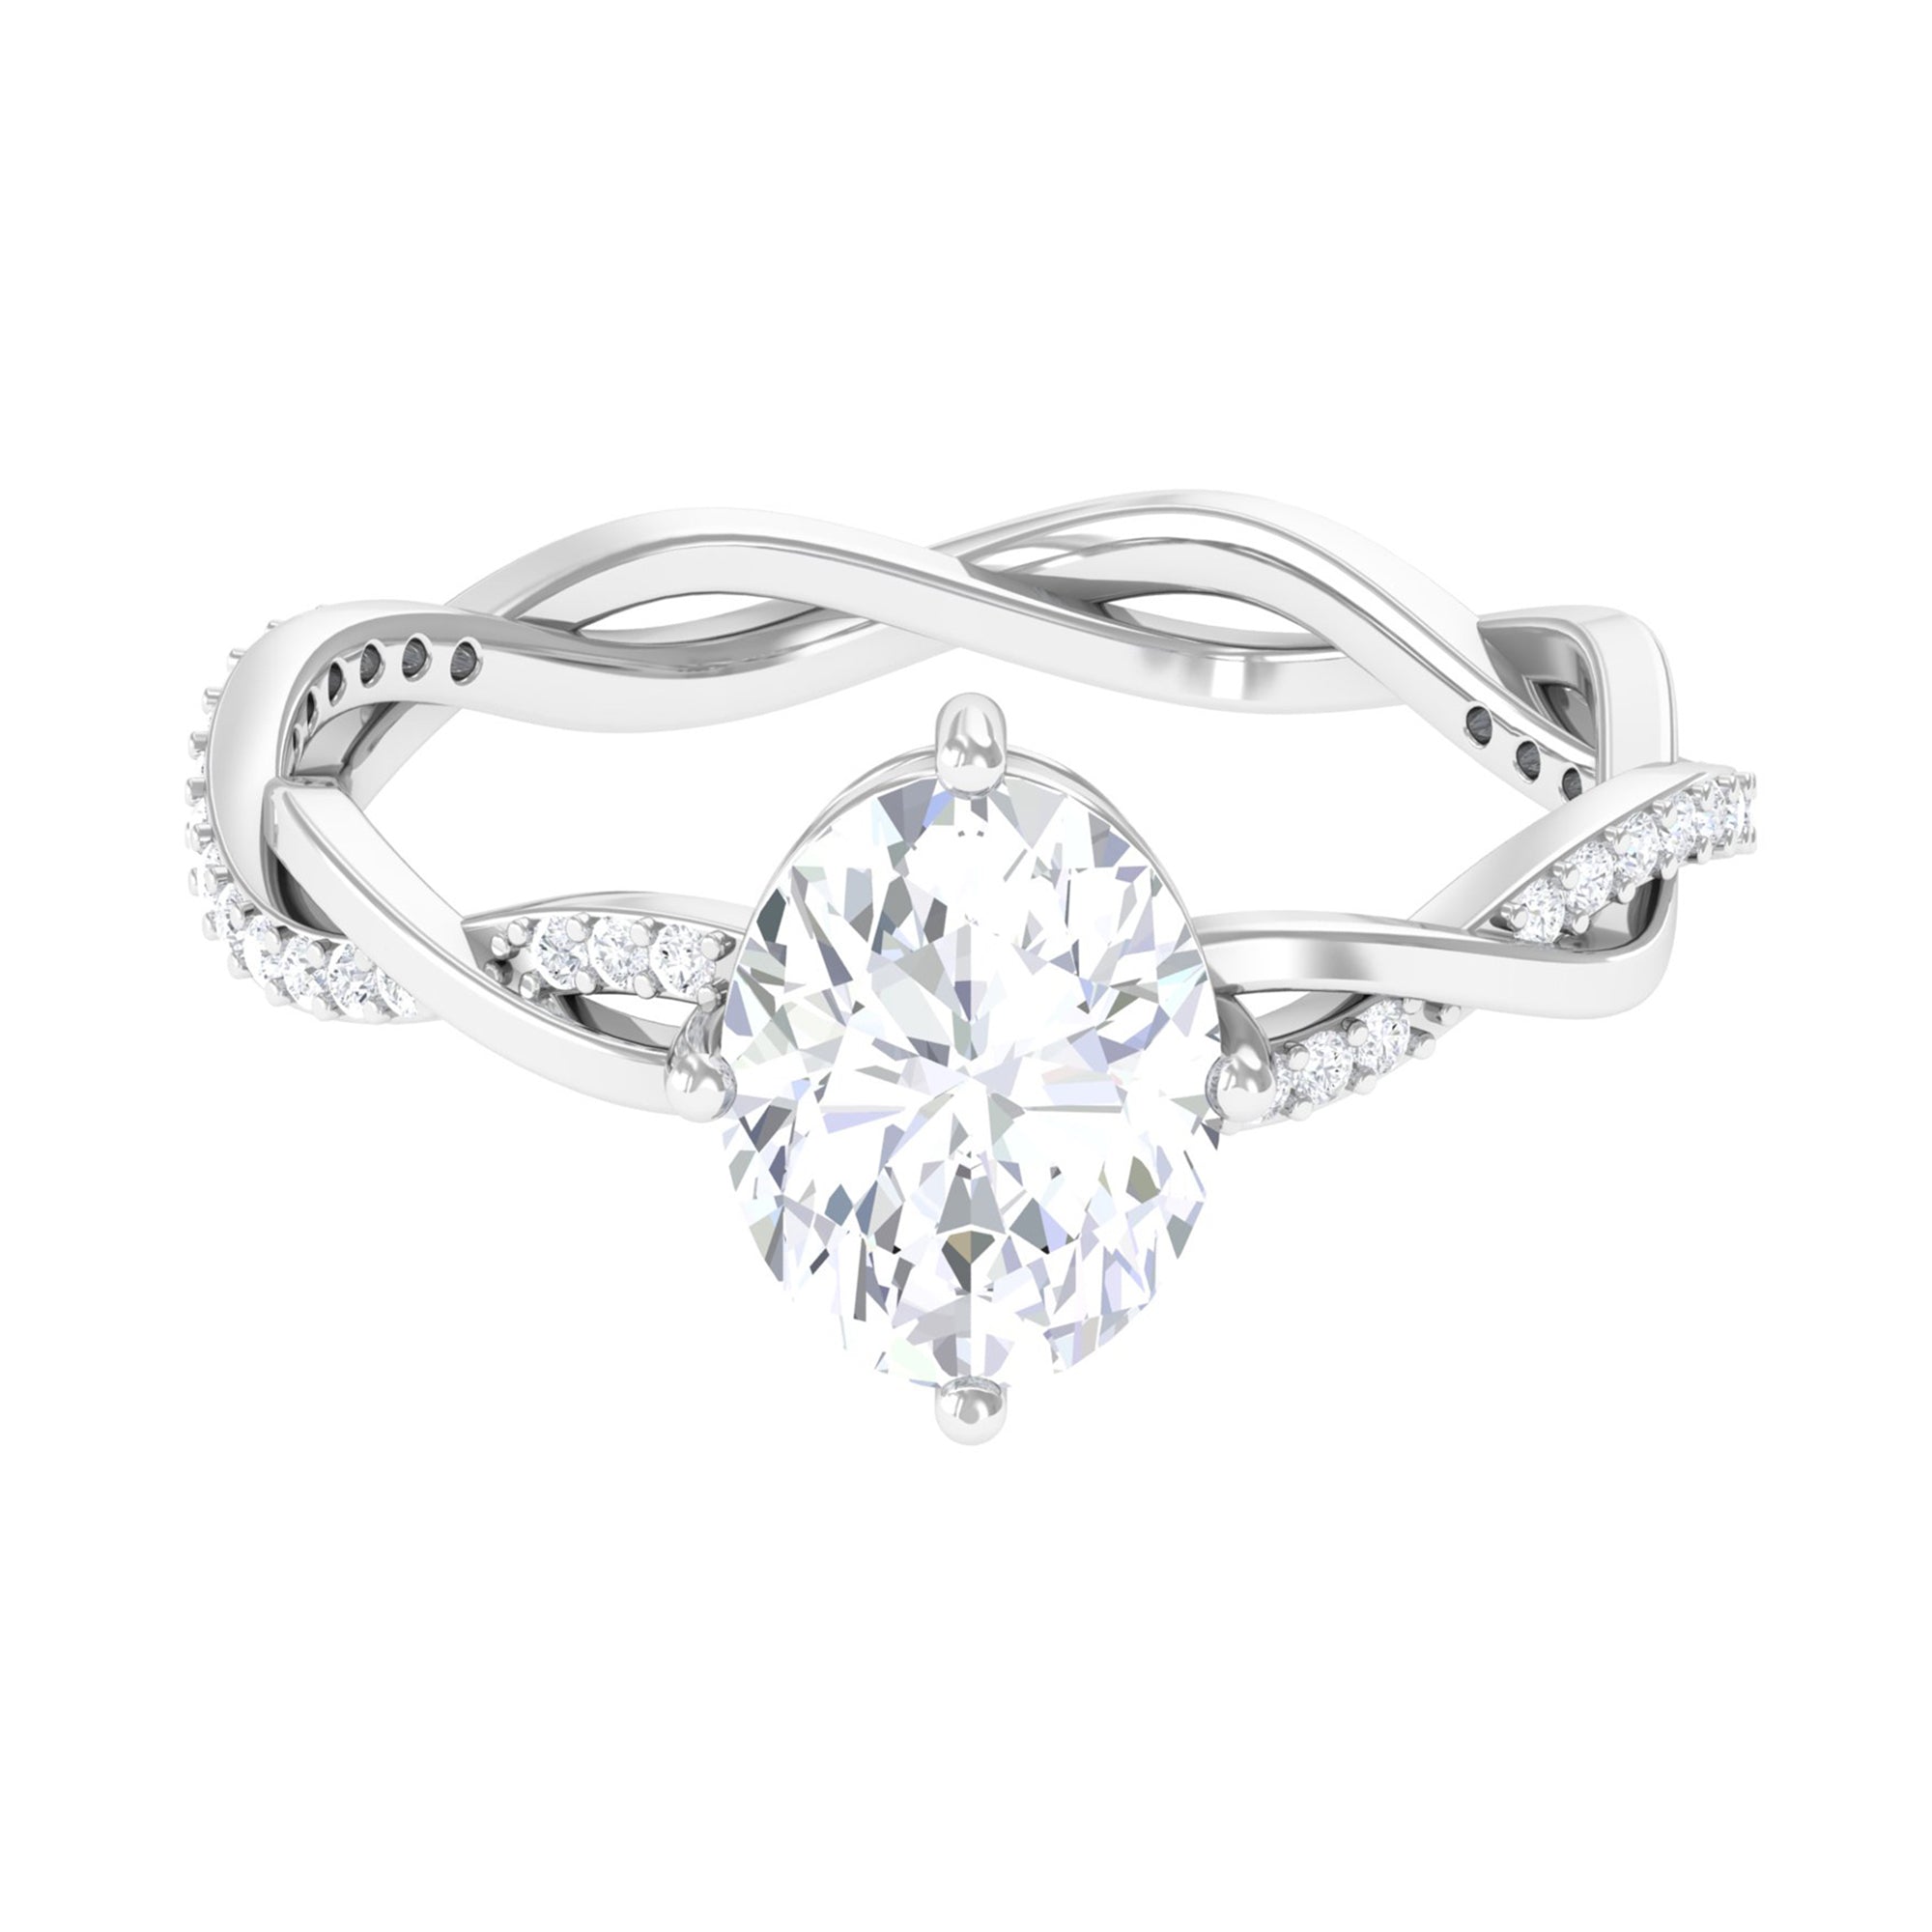 Oval Cut Solitaire Moissanite Braided Engagement Ring Moissanite - ( D-VS1 ) - Color and Clarity - Rosec Jewels